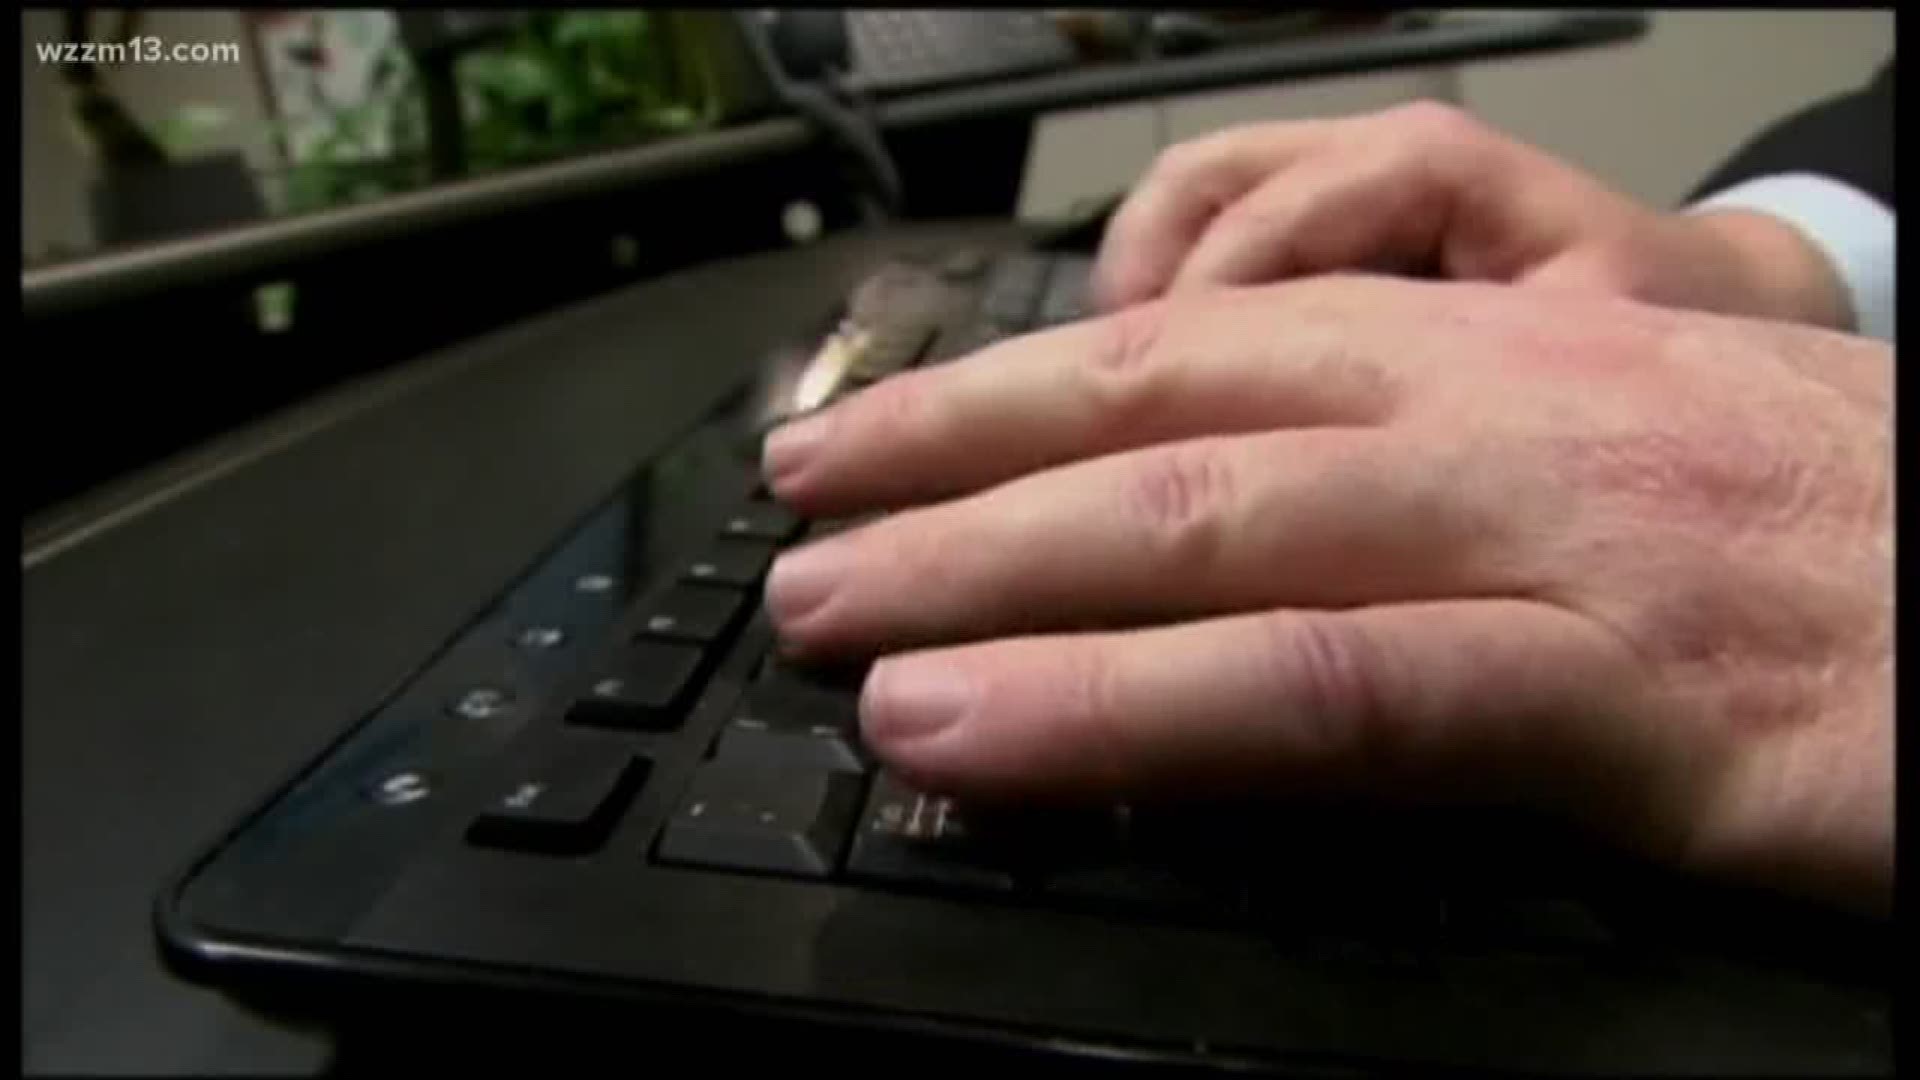 Senior Wellness: Be wary of online scammers during the holiday season